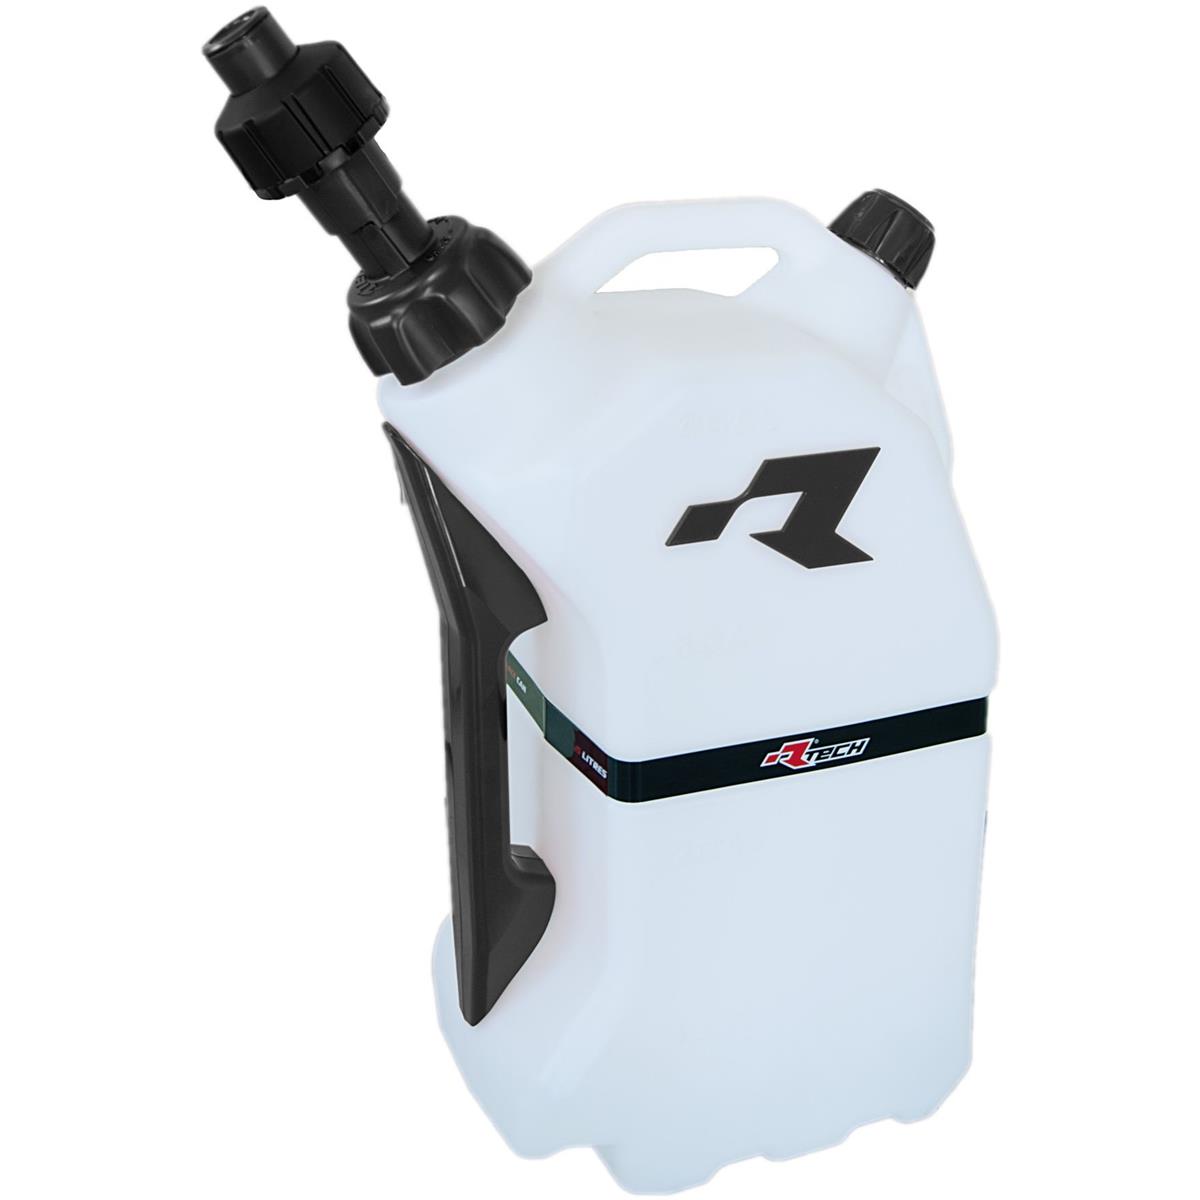 RTECH Gas Can R15 with Quick Tank System, 15 L, Black